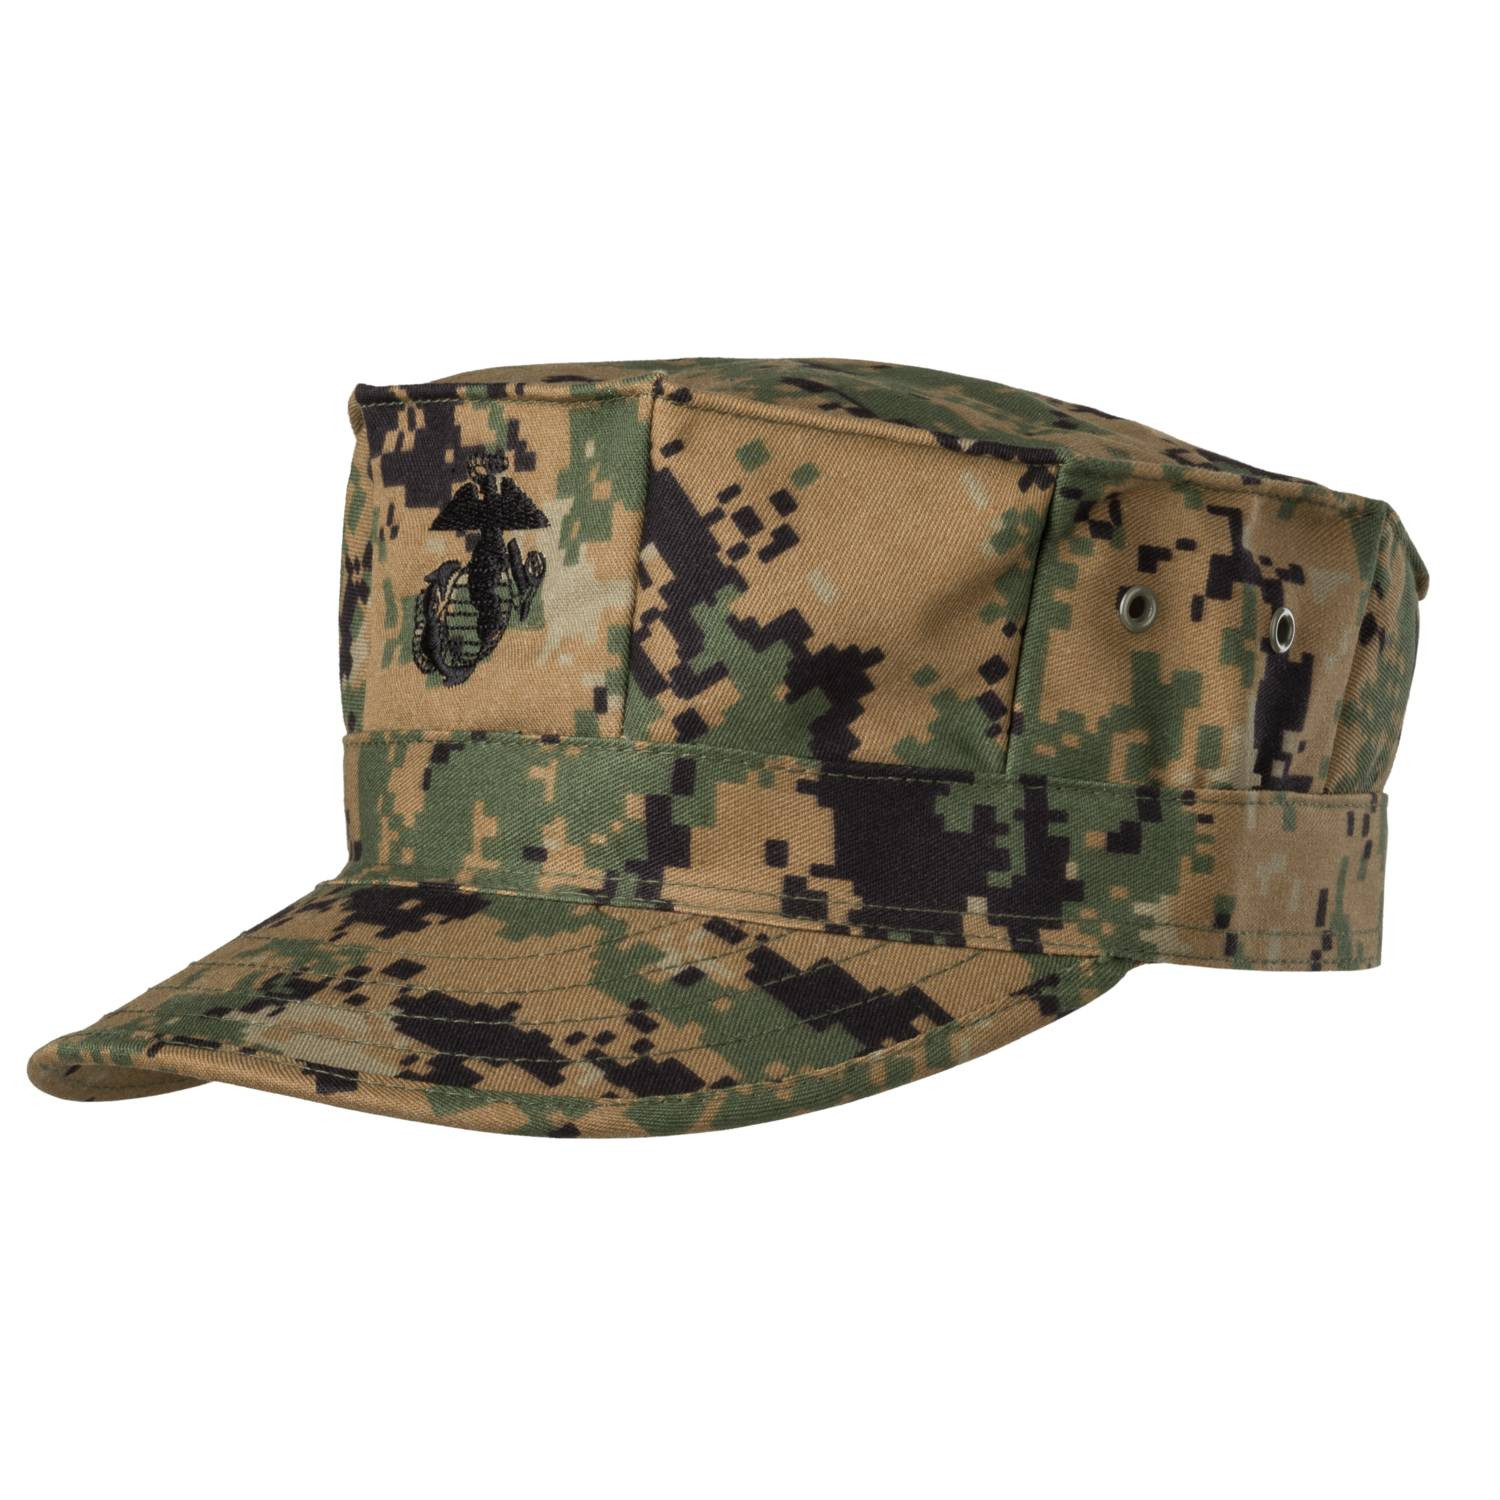 NEW DIGITAL WOODLAND BOONIE HAT SIZE X-LARGE MARINE CORPS CAMOUFLAGE PATTERN 